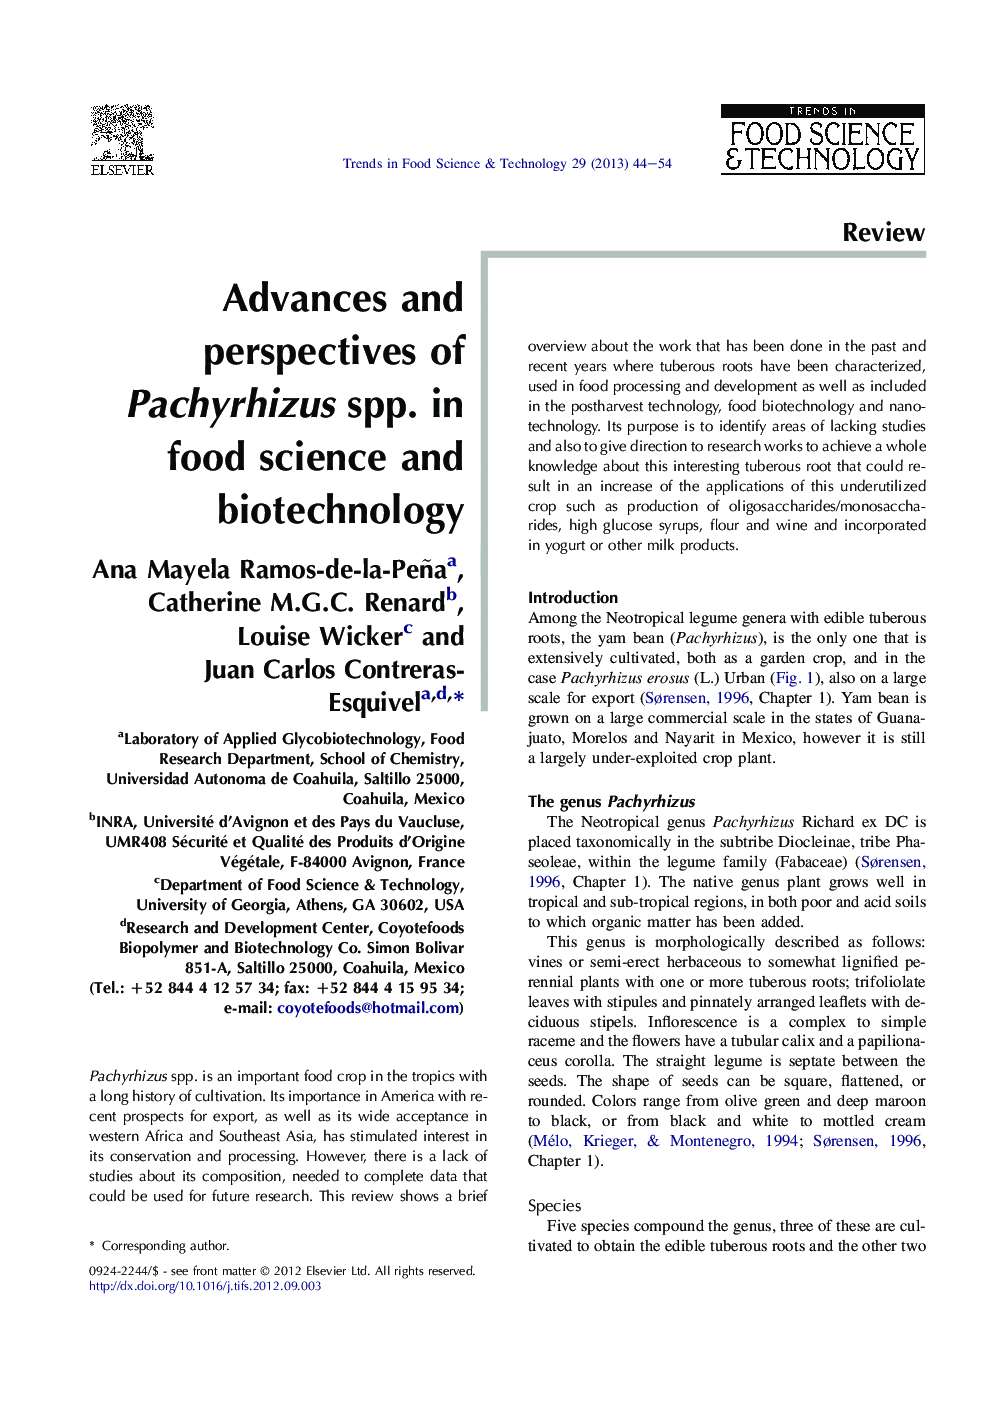 Advances and perspectives of Pachyrhizus spp. in food science and biotechnology